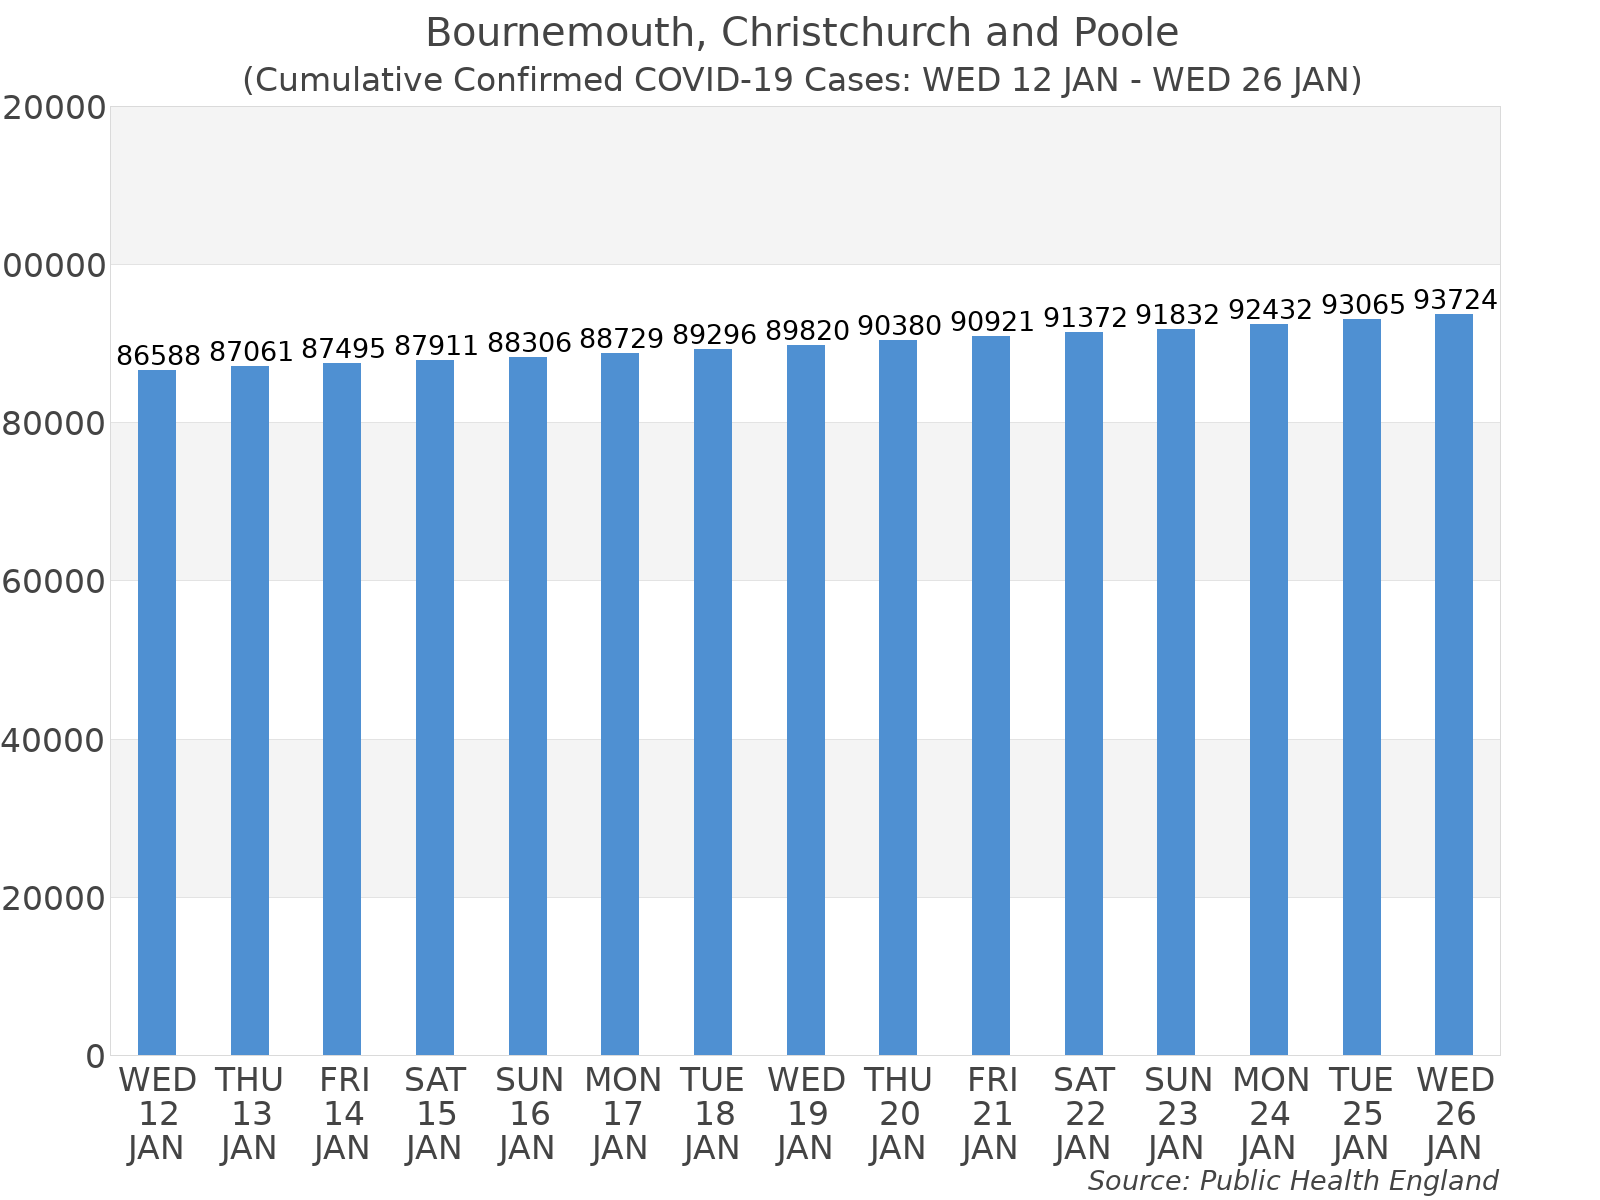 Graph tracking the number of confirmed coronavirus (COVID-19) cases where the patient lives within the Bournemouth, Christchurch and Poole Upper Tier Local Authority Area.